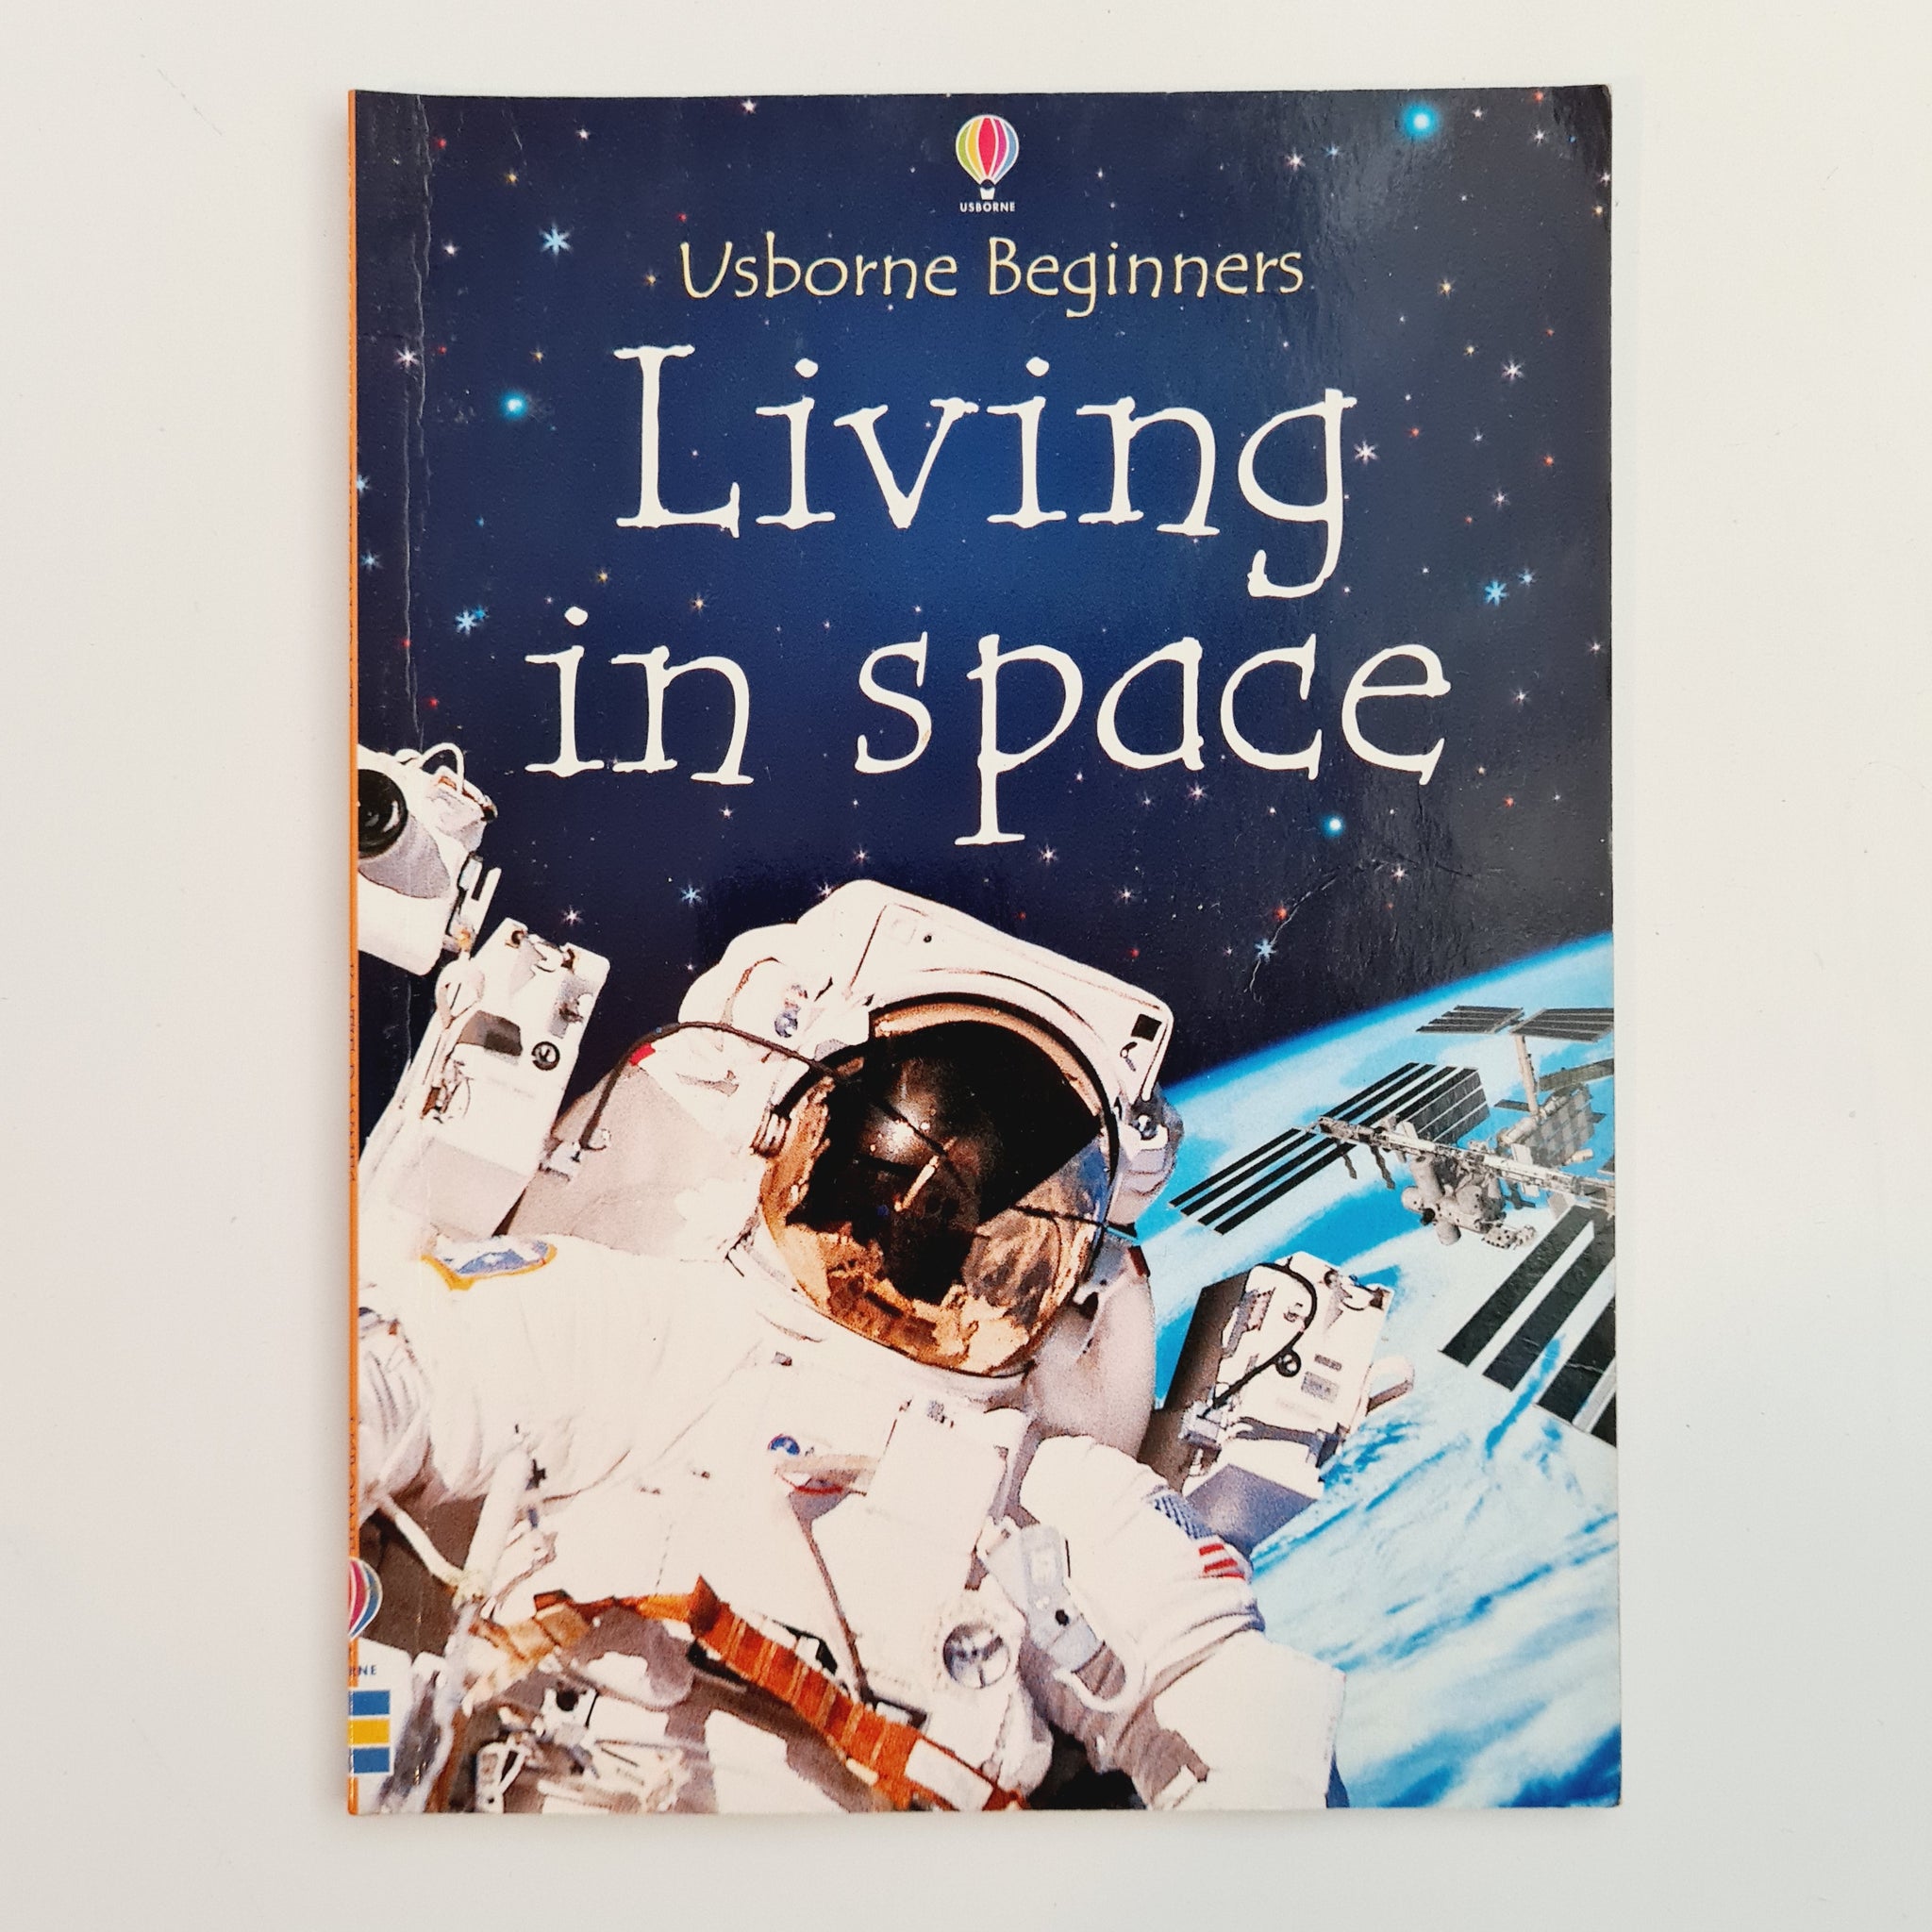 Living In Space